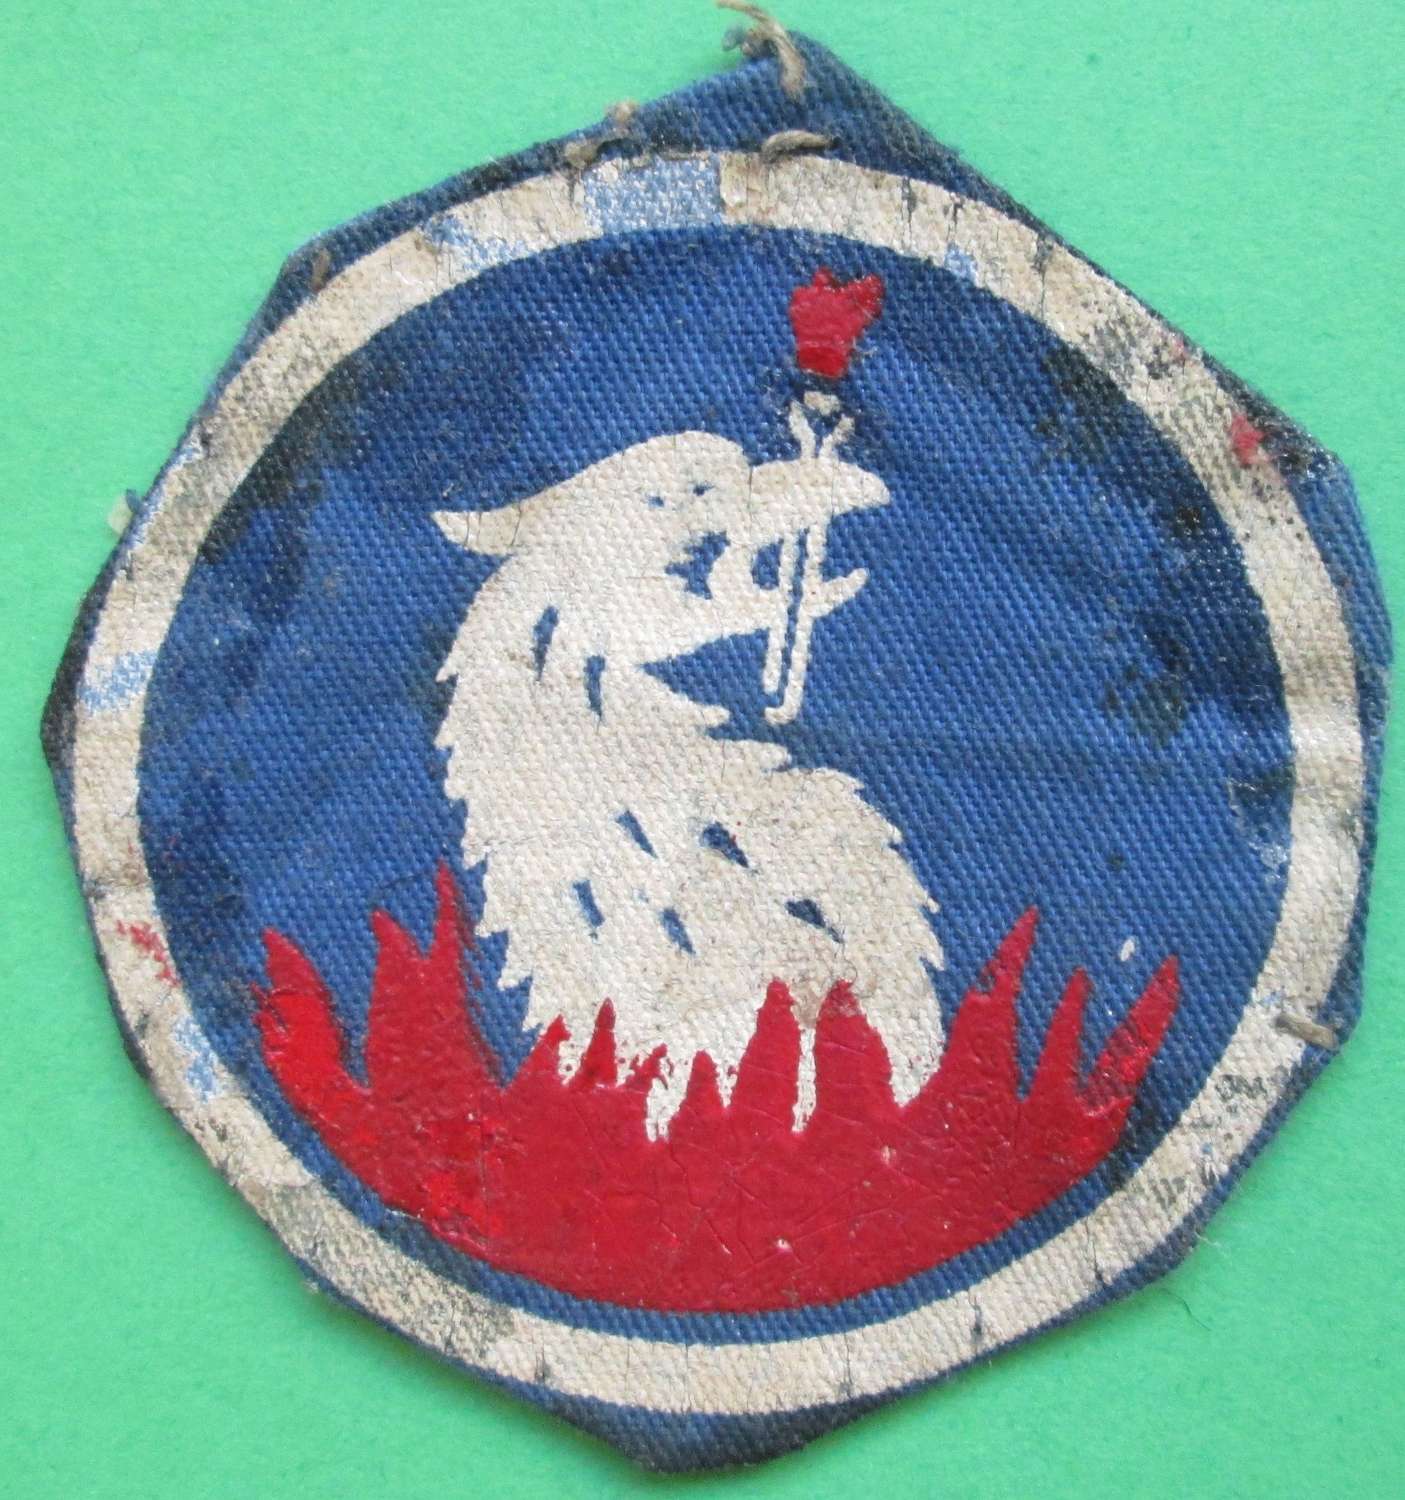 A 219th INDEPENDENT INFANTRY BRIGADE FORMATION SIGN